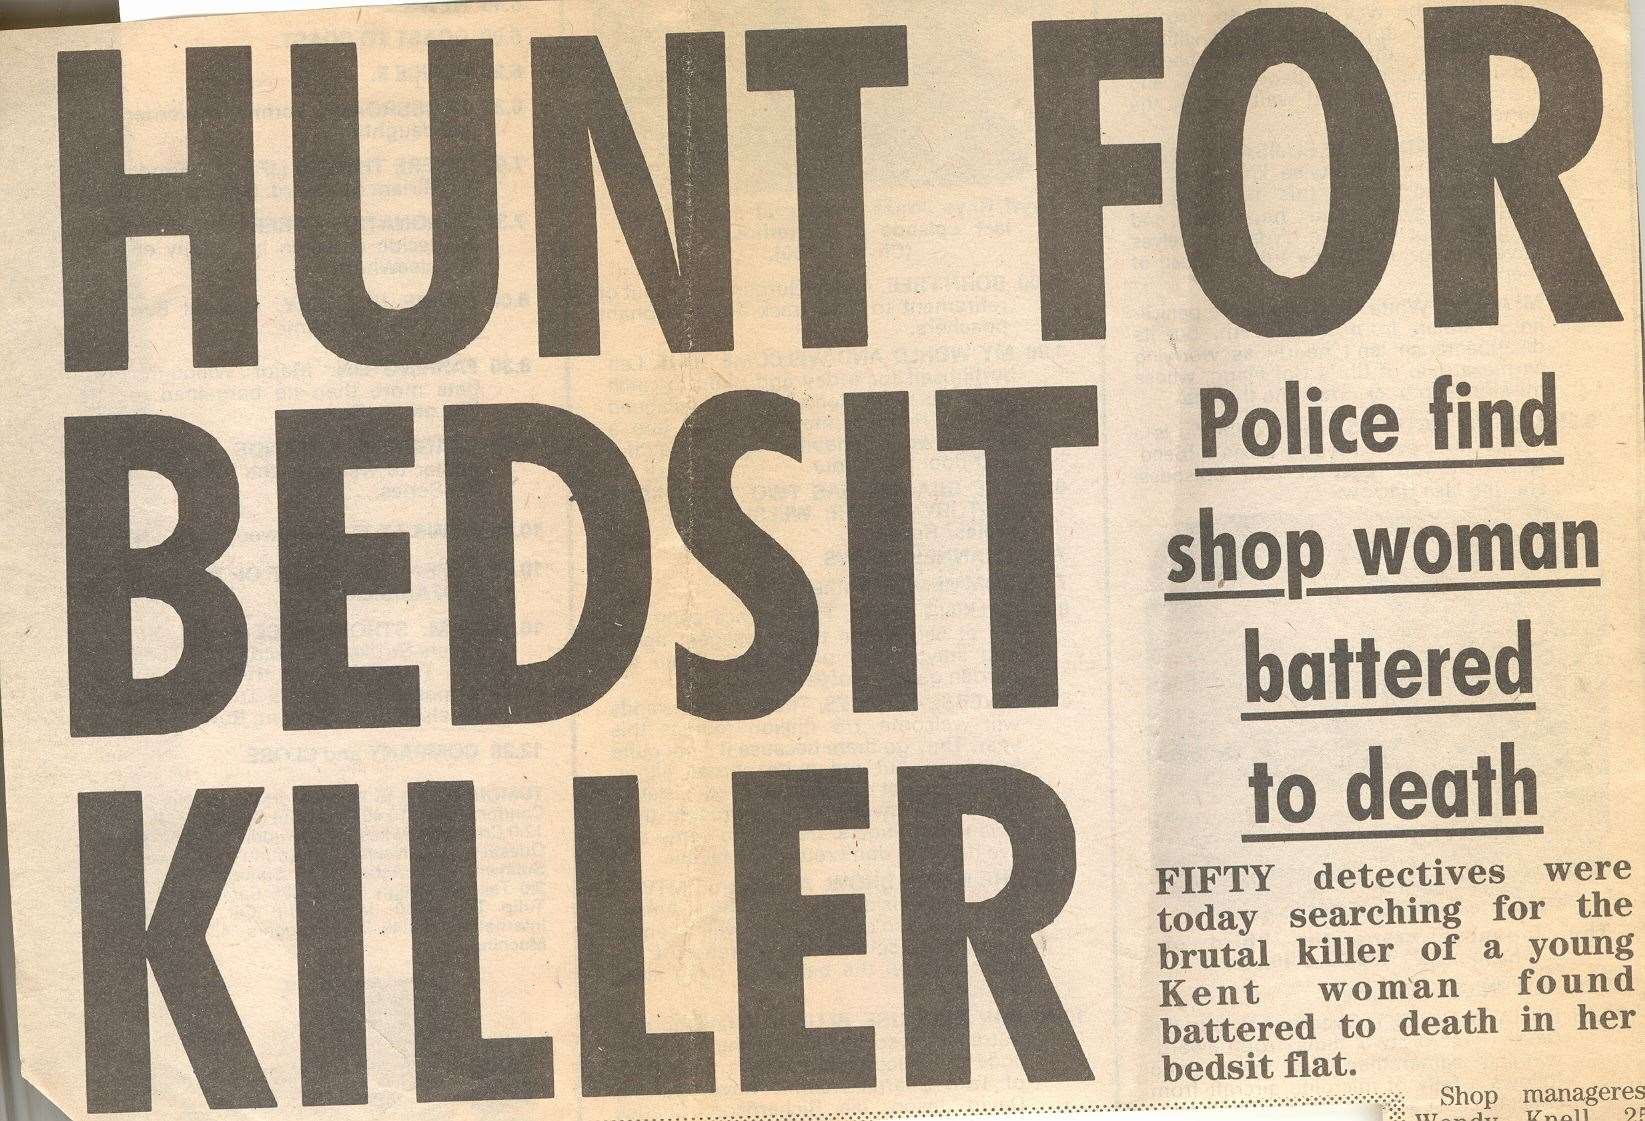 Coverage of the Wendy Knell and Caroline Pierce murders in 1987